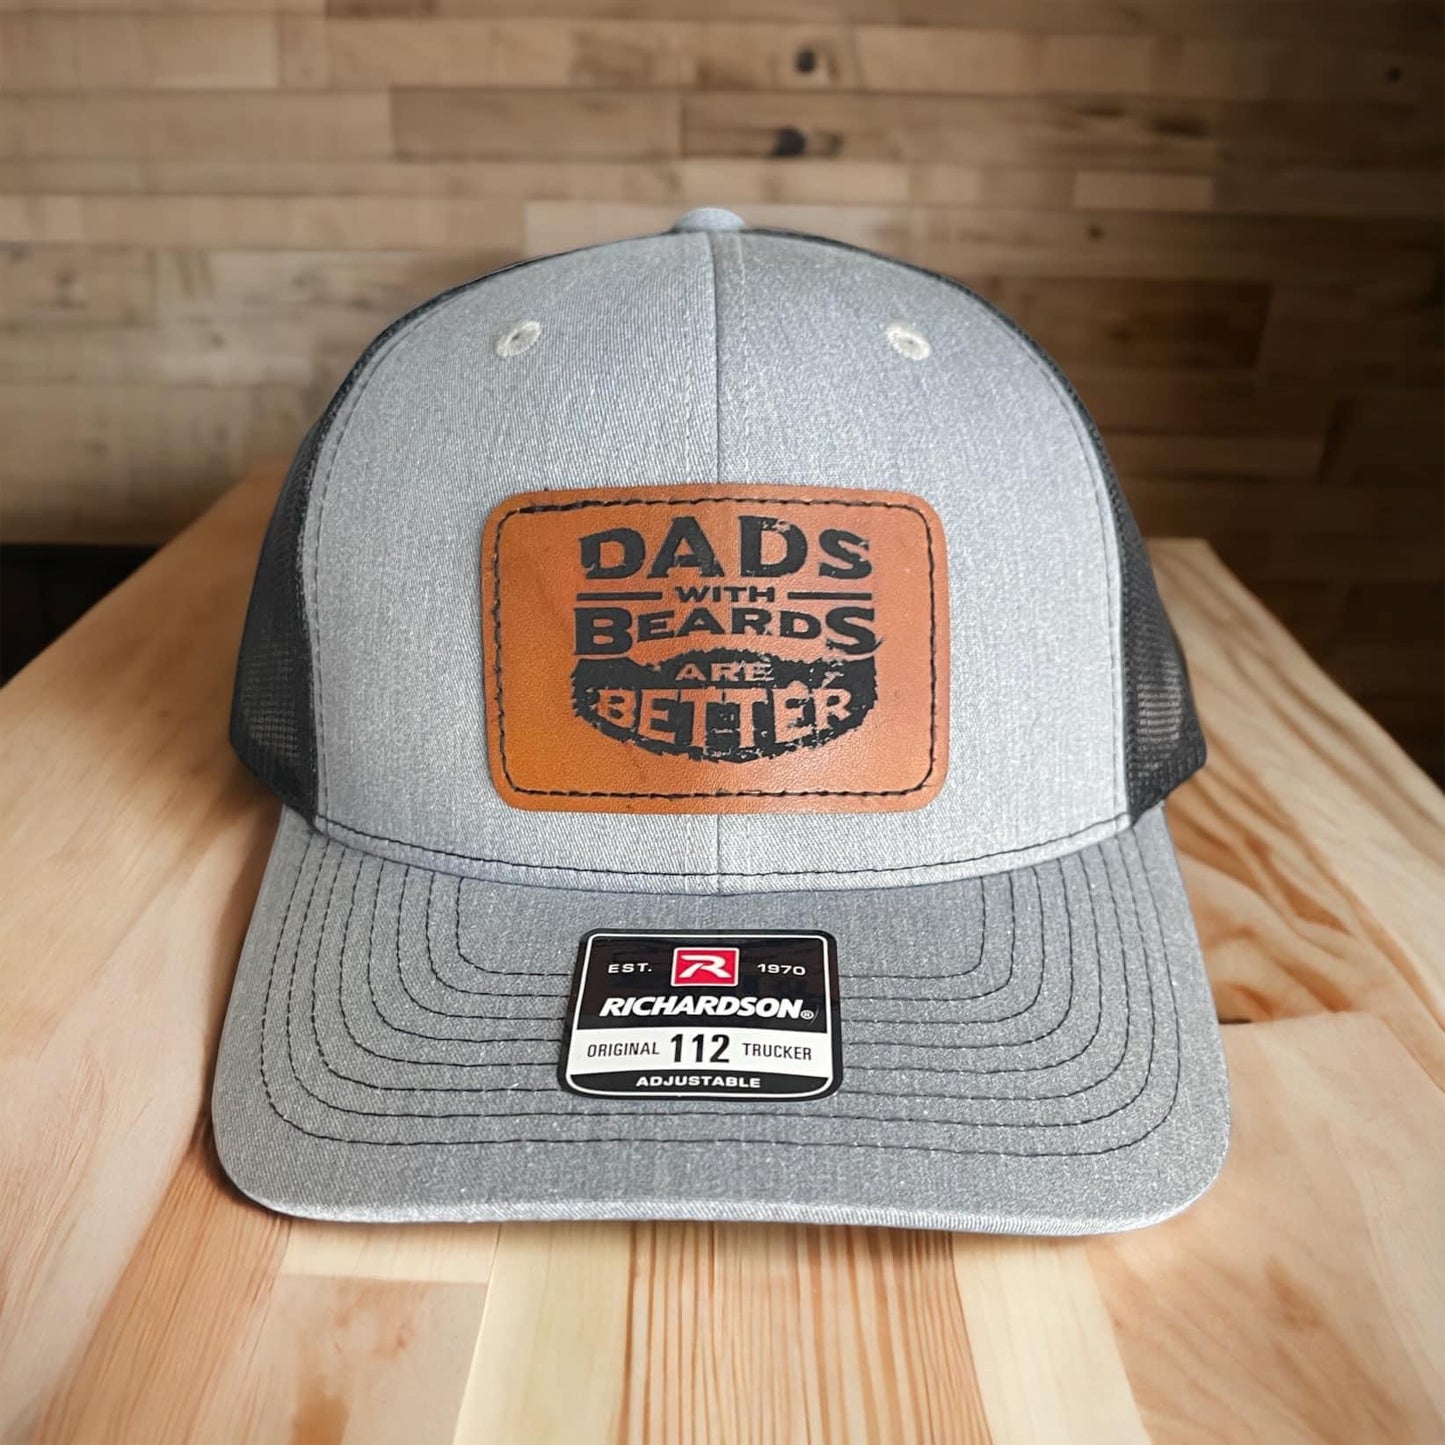 Dads with beards are better Hat